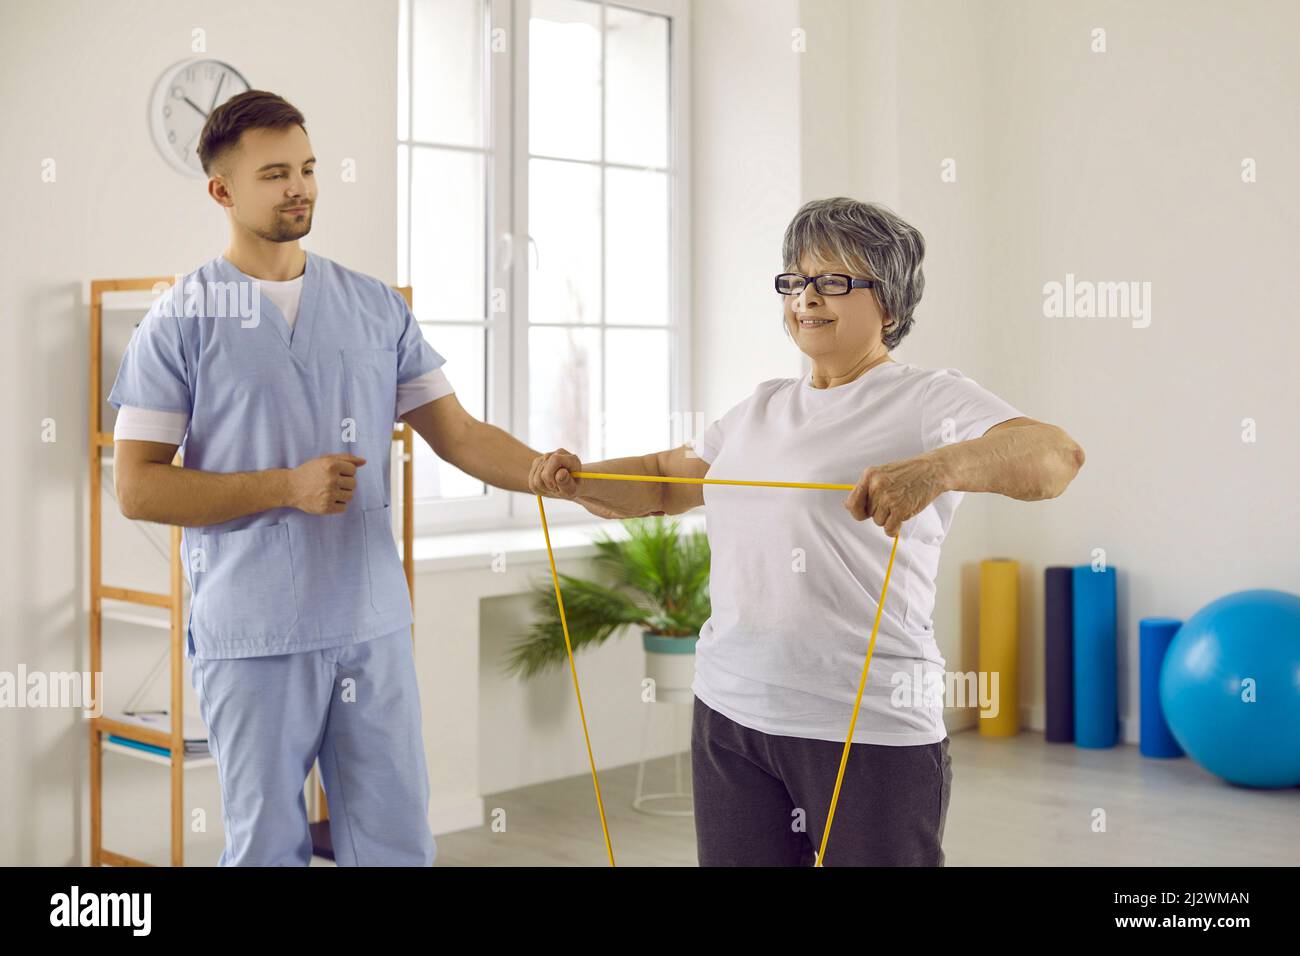 Joyful old woman with doctor trains during rehabilitation with help of resistant band. Stock Photo